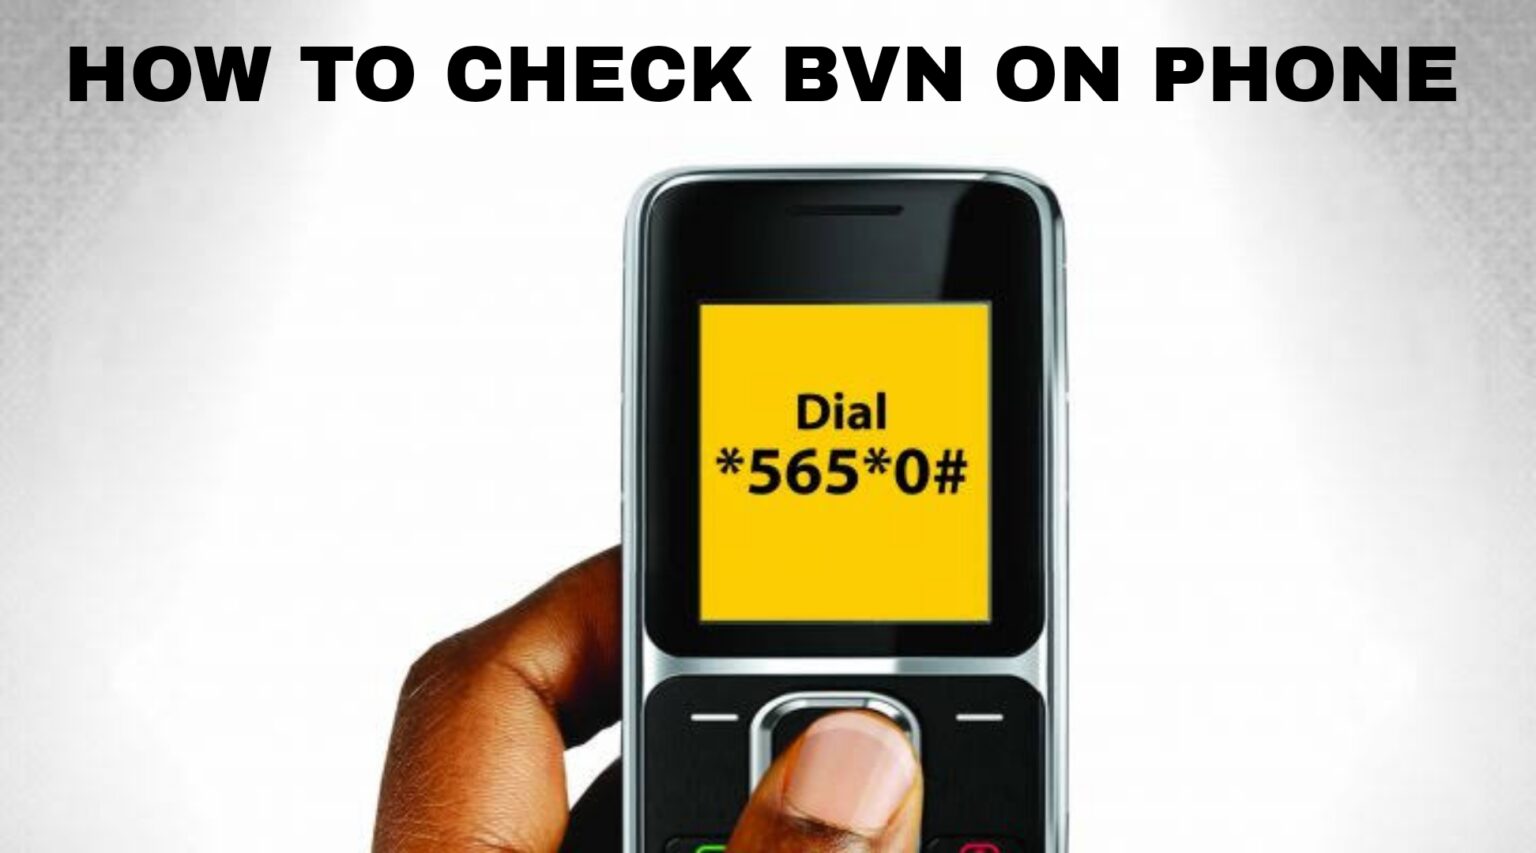 How to Check BVN on MTN, Airtel, Etisalat And GLO